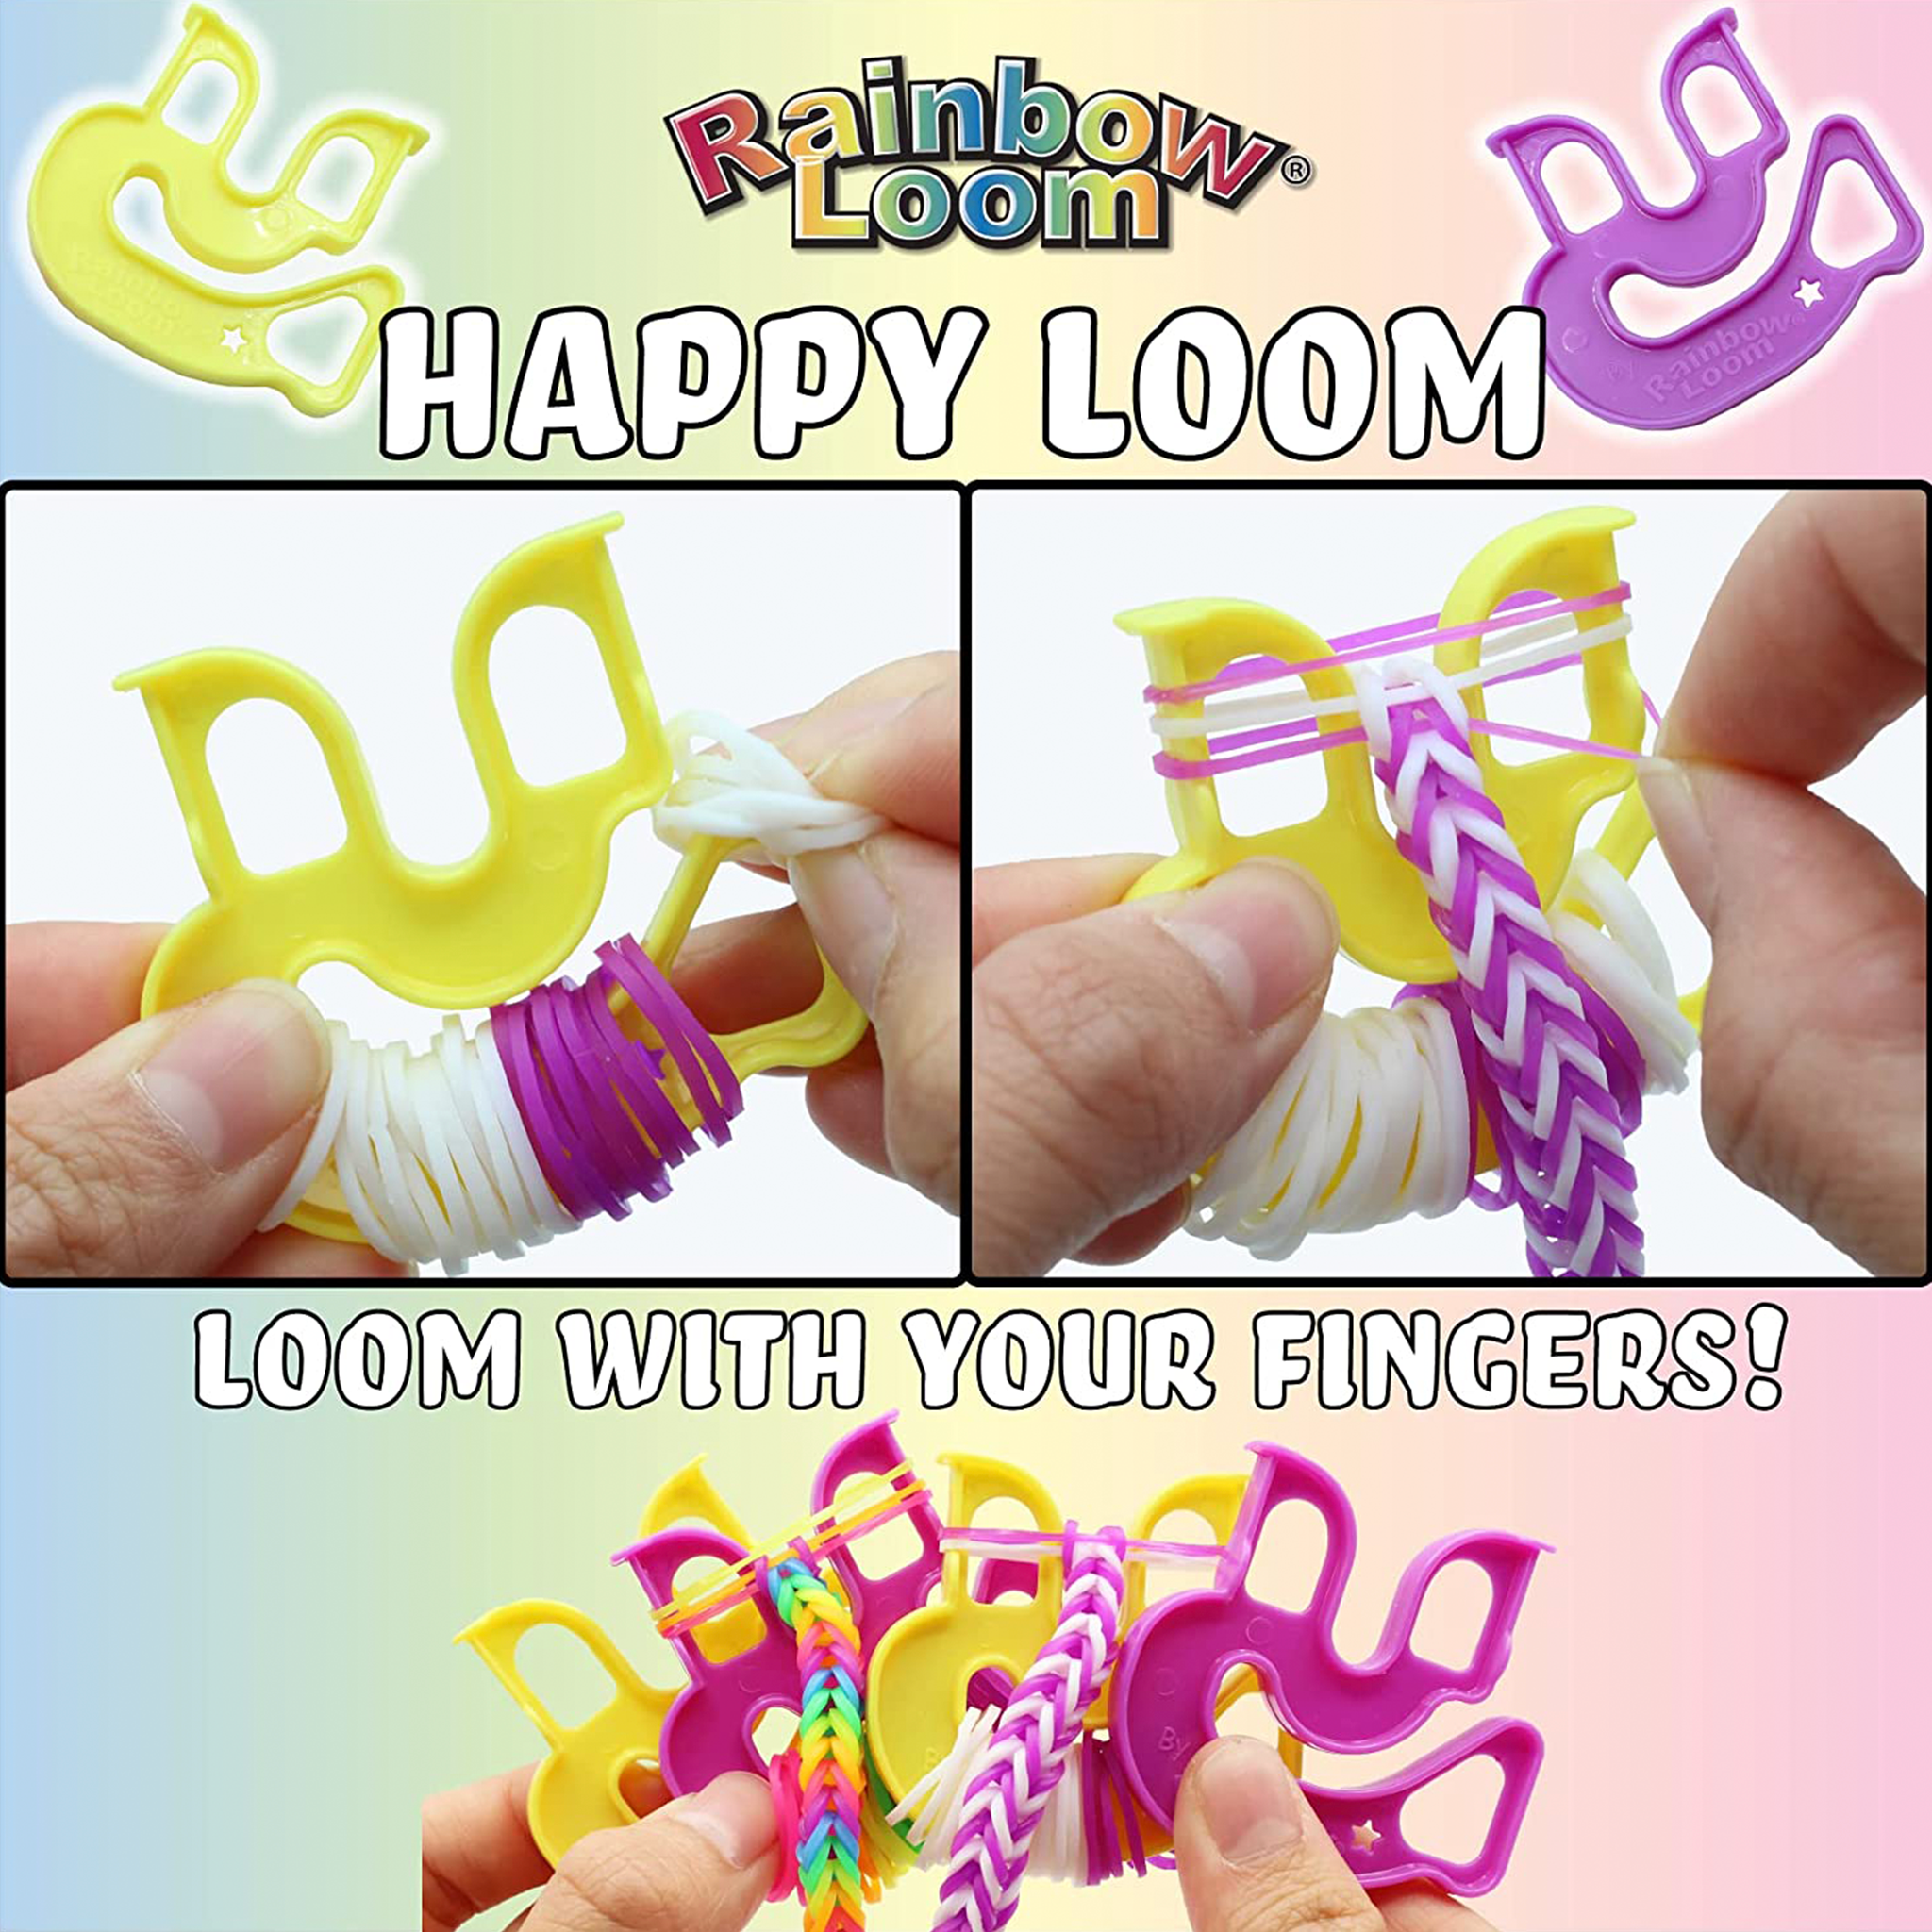 Rainbow Loom Loomipal Mega Combo Set By, For Ages 7+, By Choon's Design